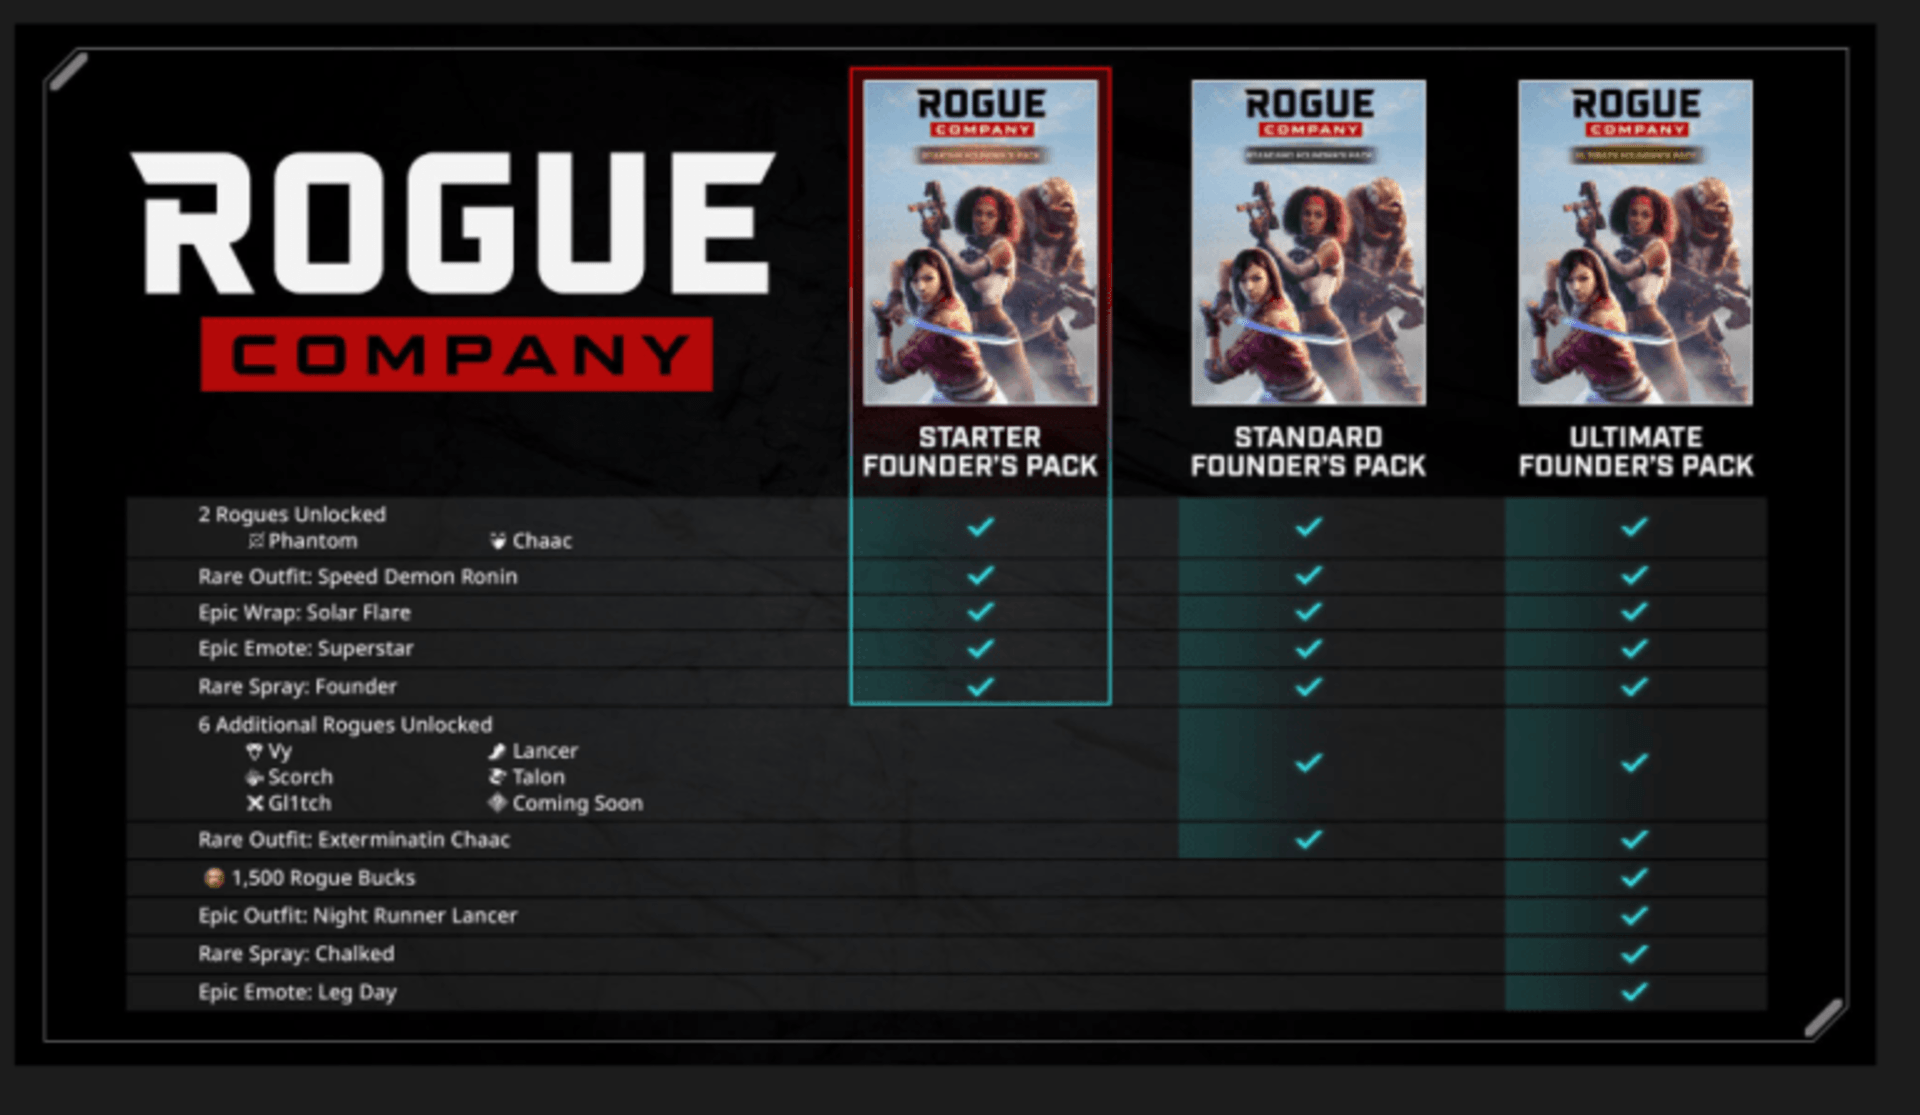 Rogue Company Standard Founders Pack (XBOX ONE) cheap - Price of